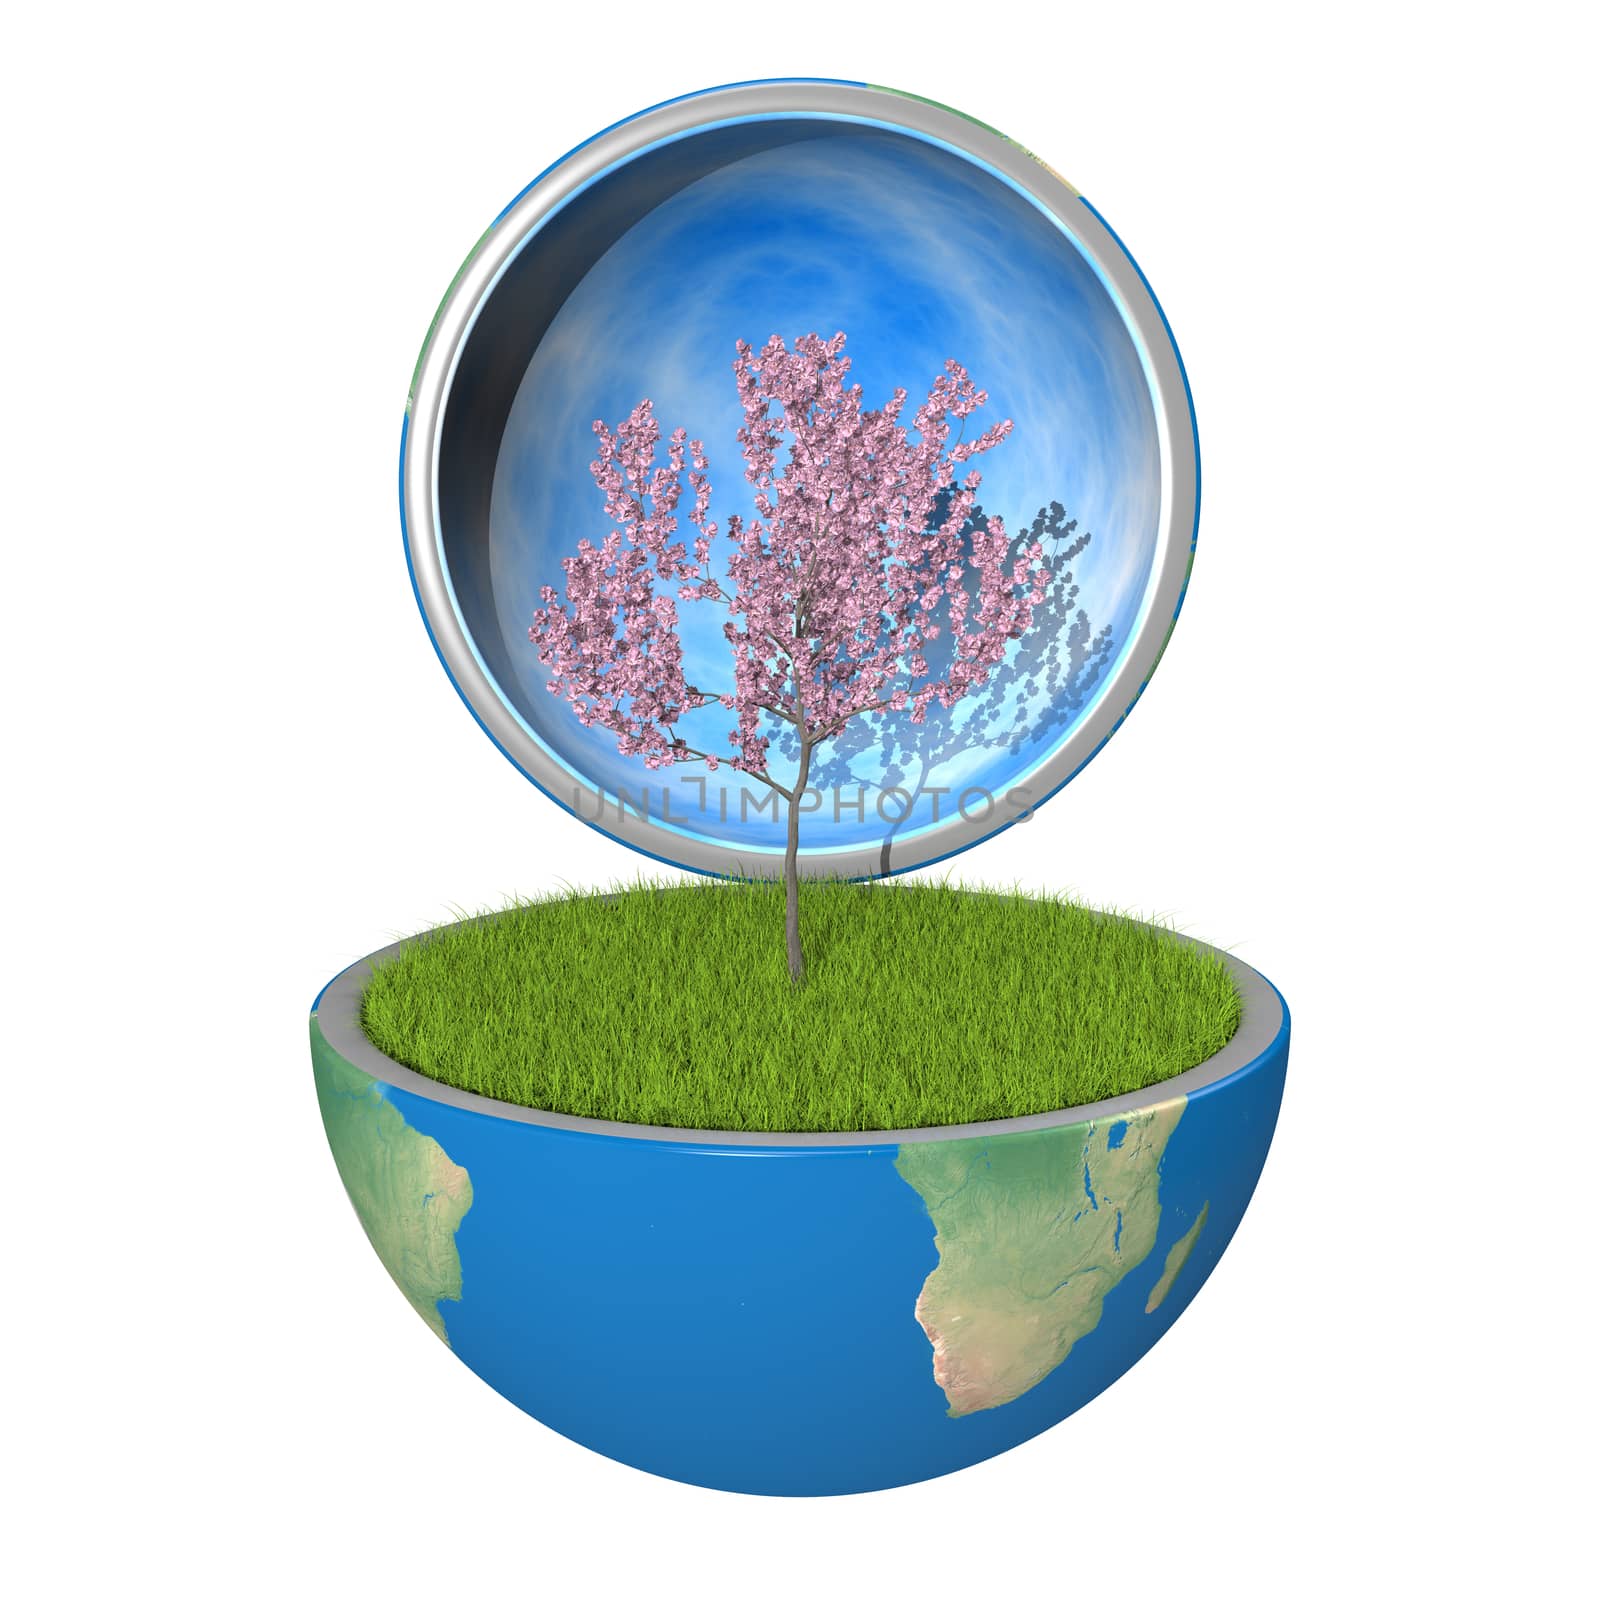 Tree inside planet by Harvepino